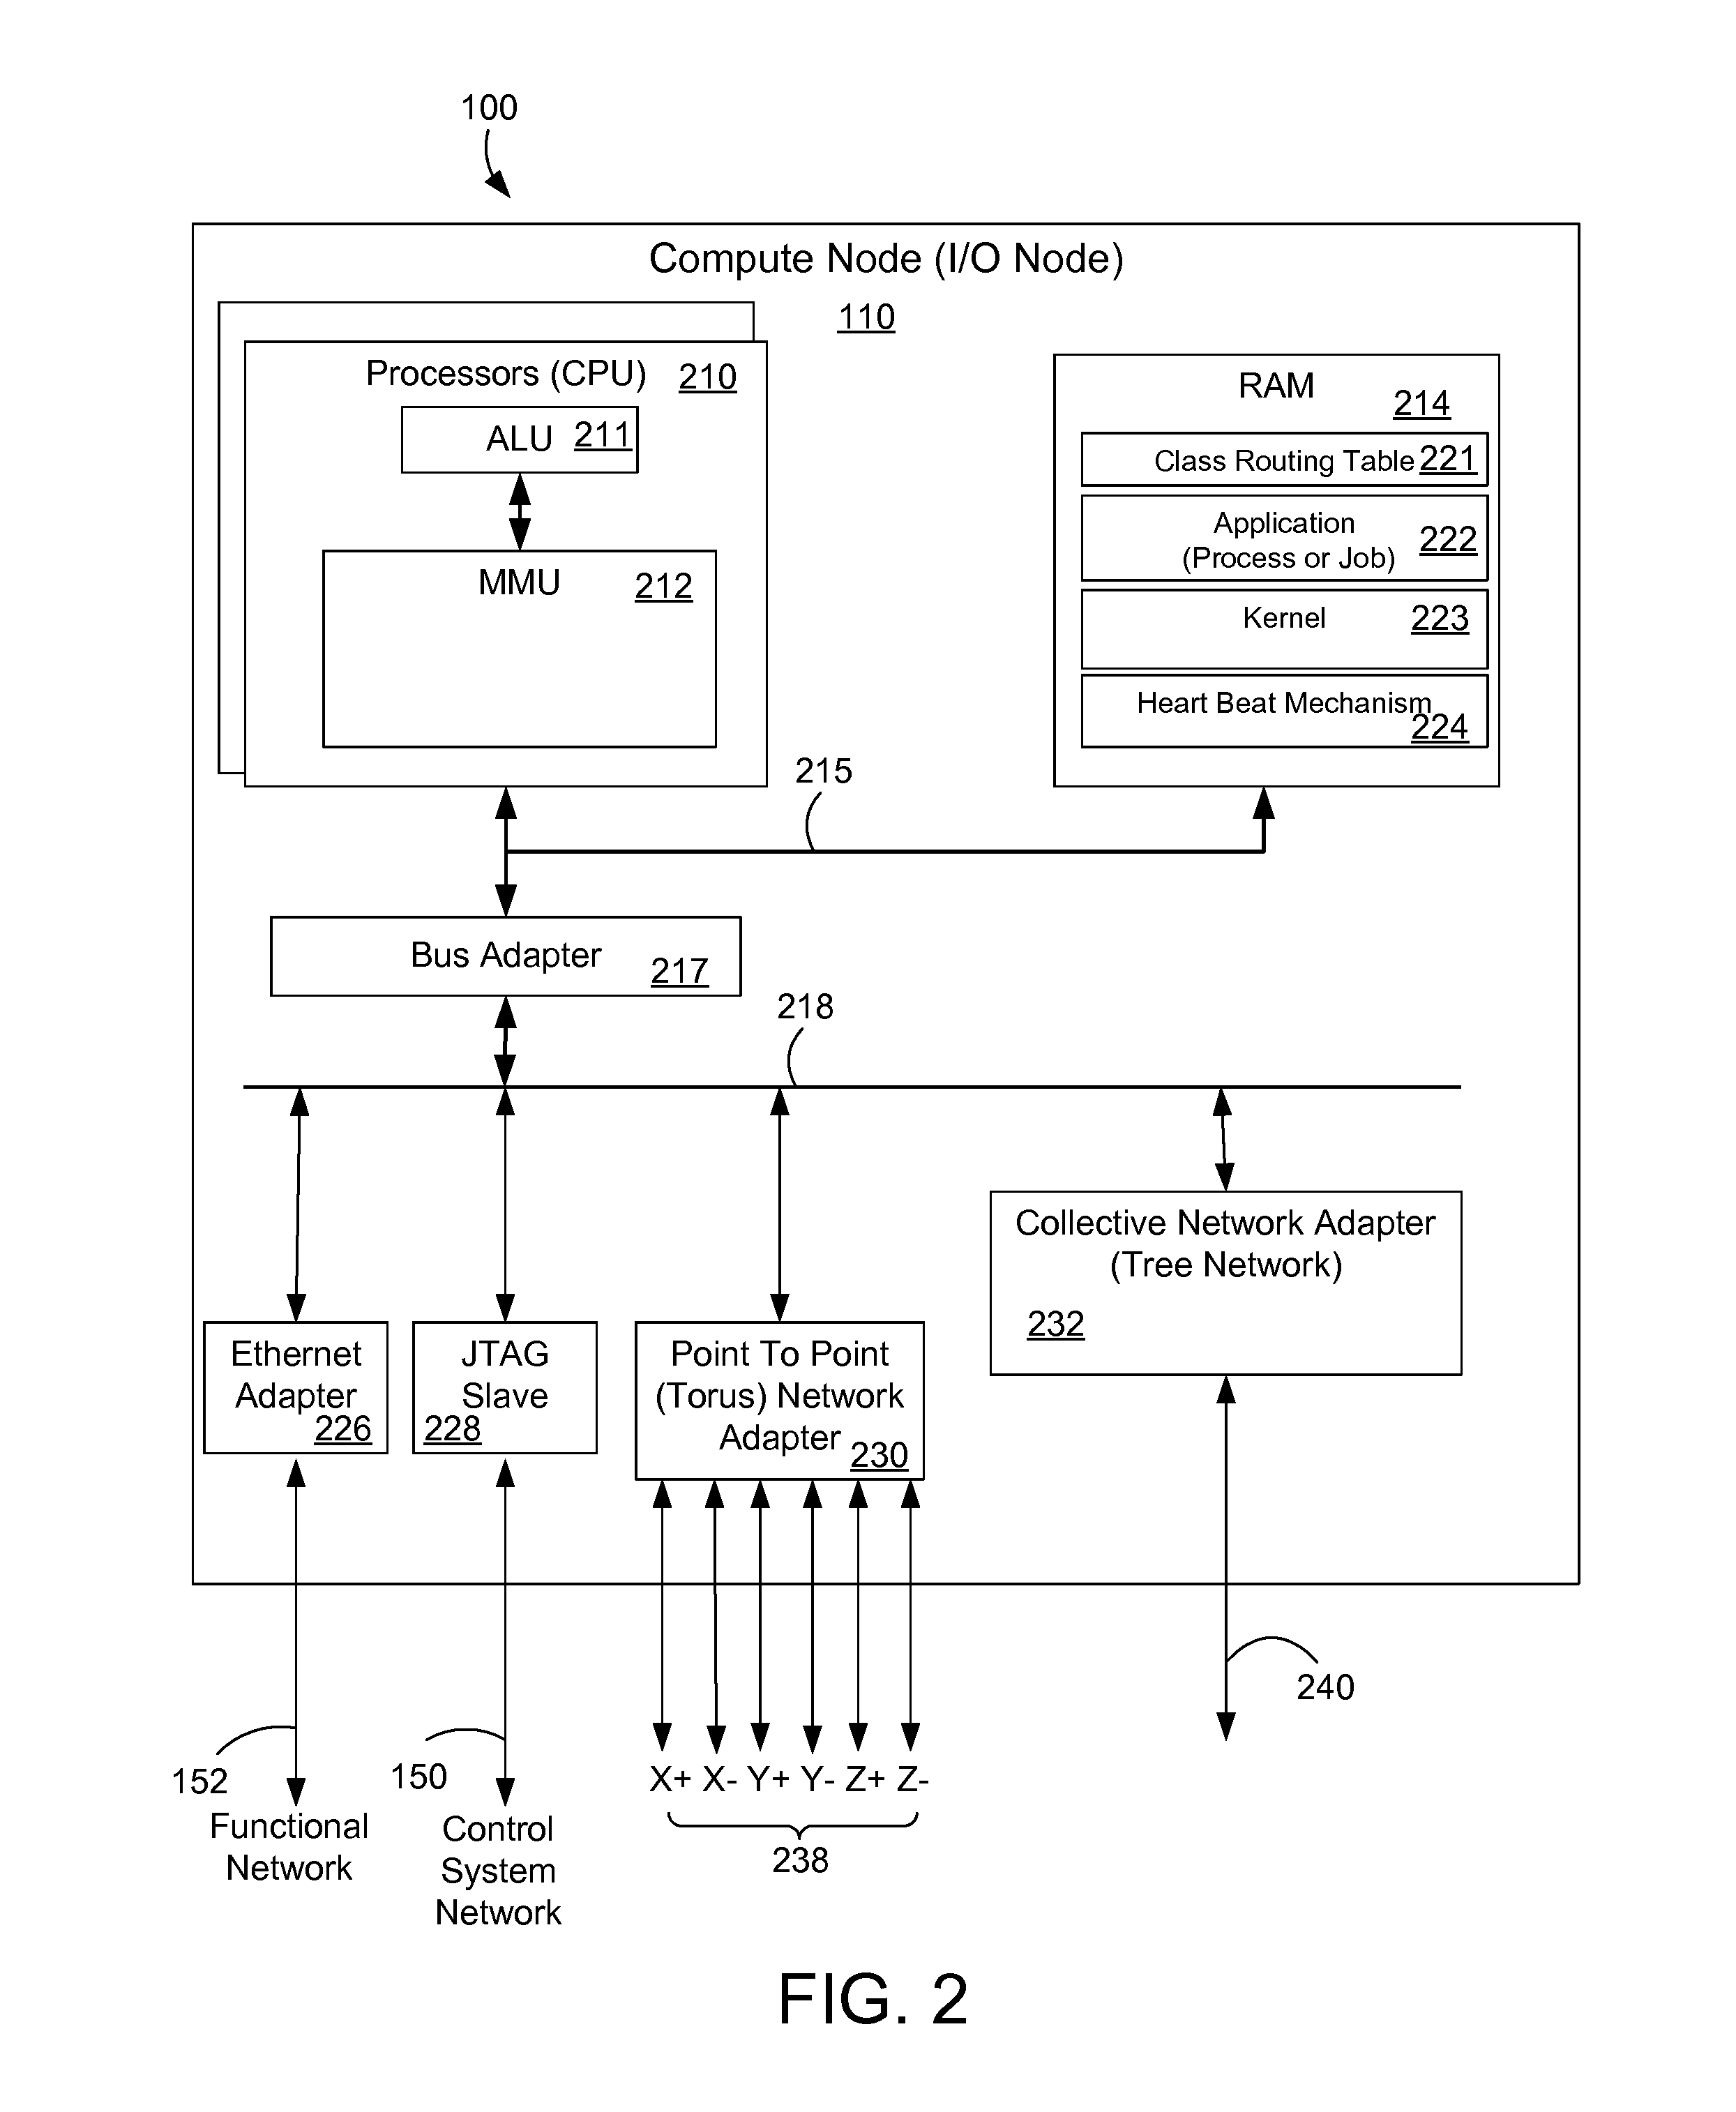 Optimizing power consumption and performance in a hybrid computer environment